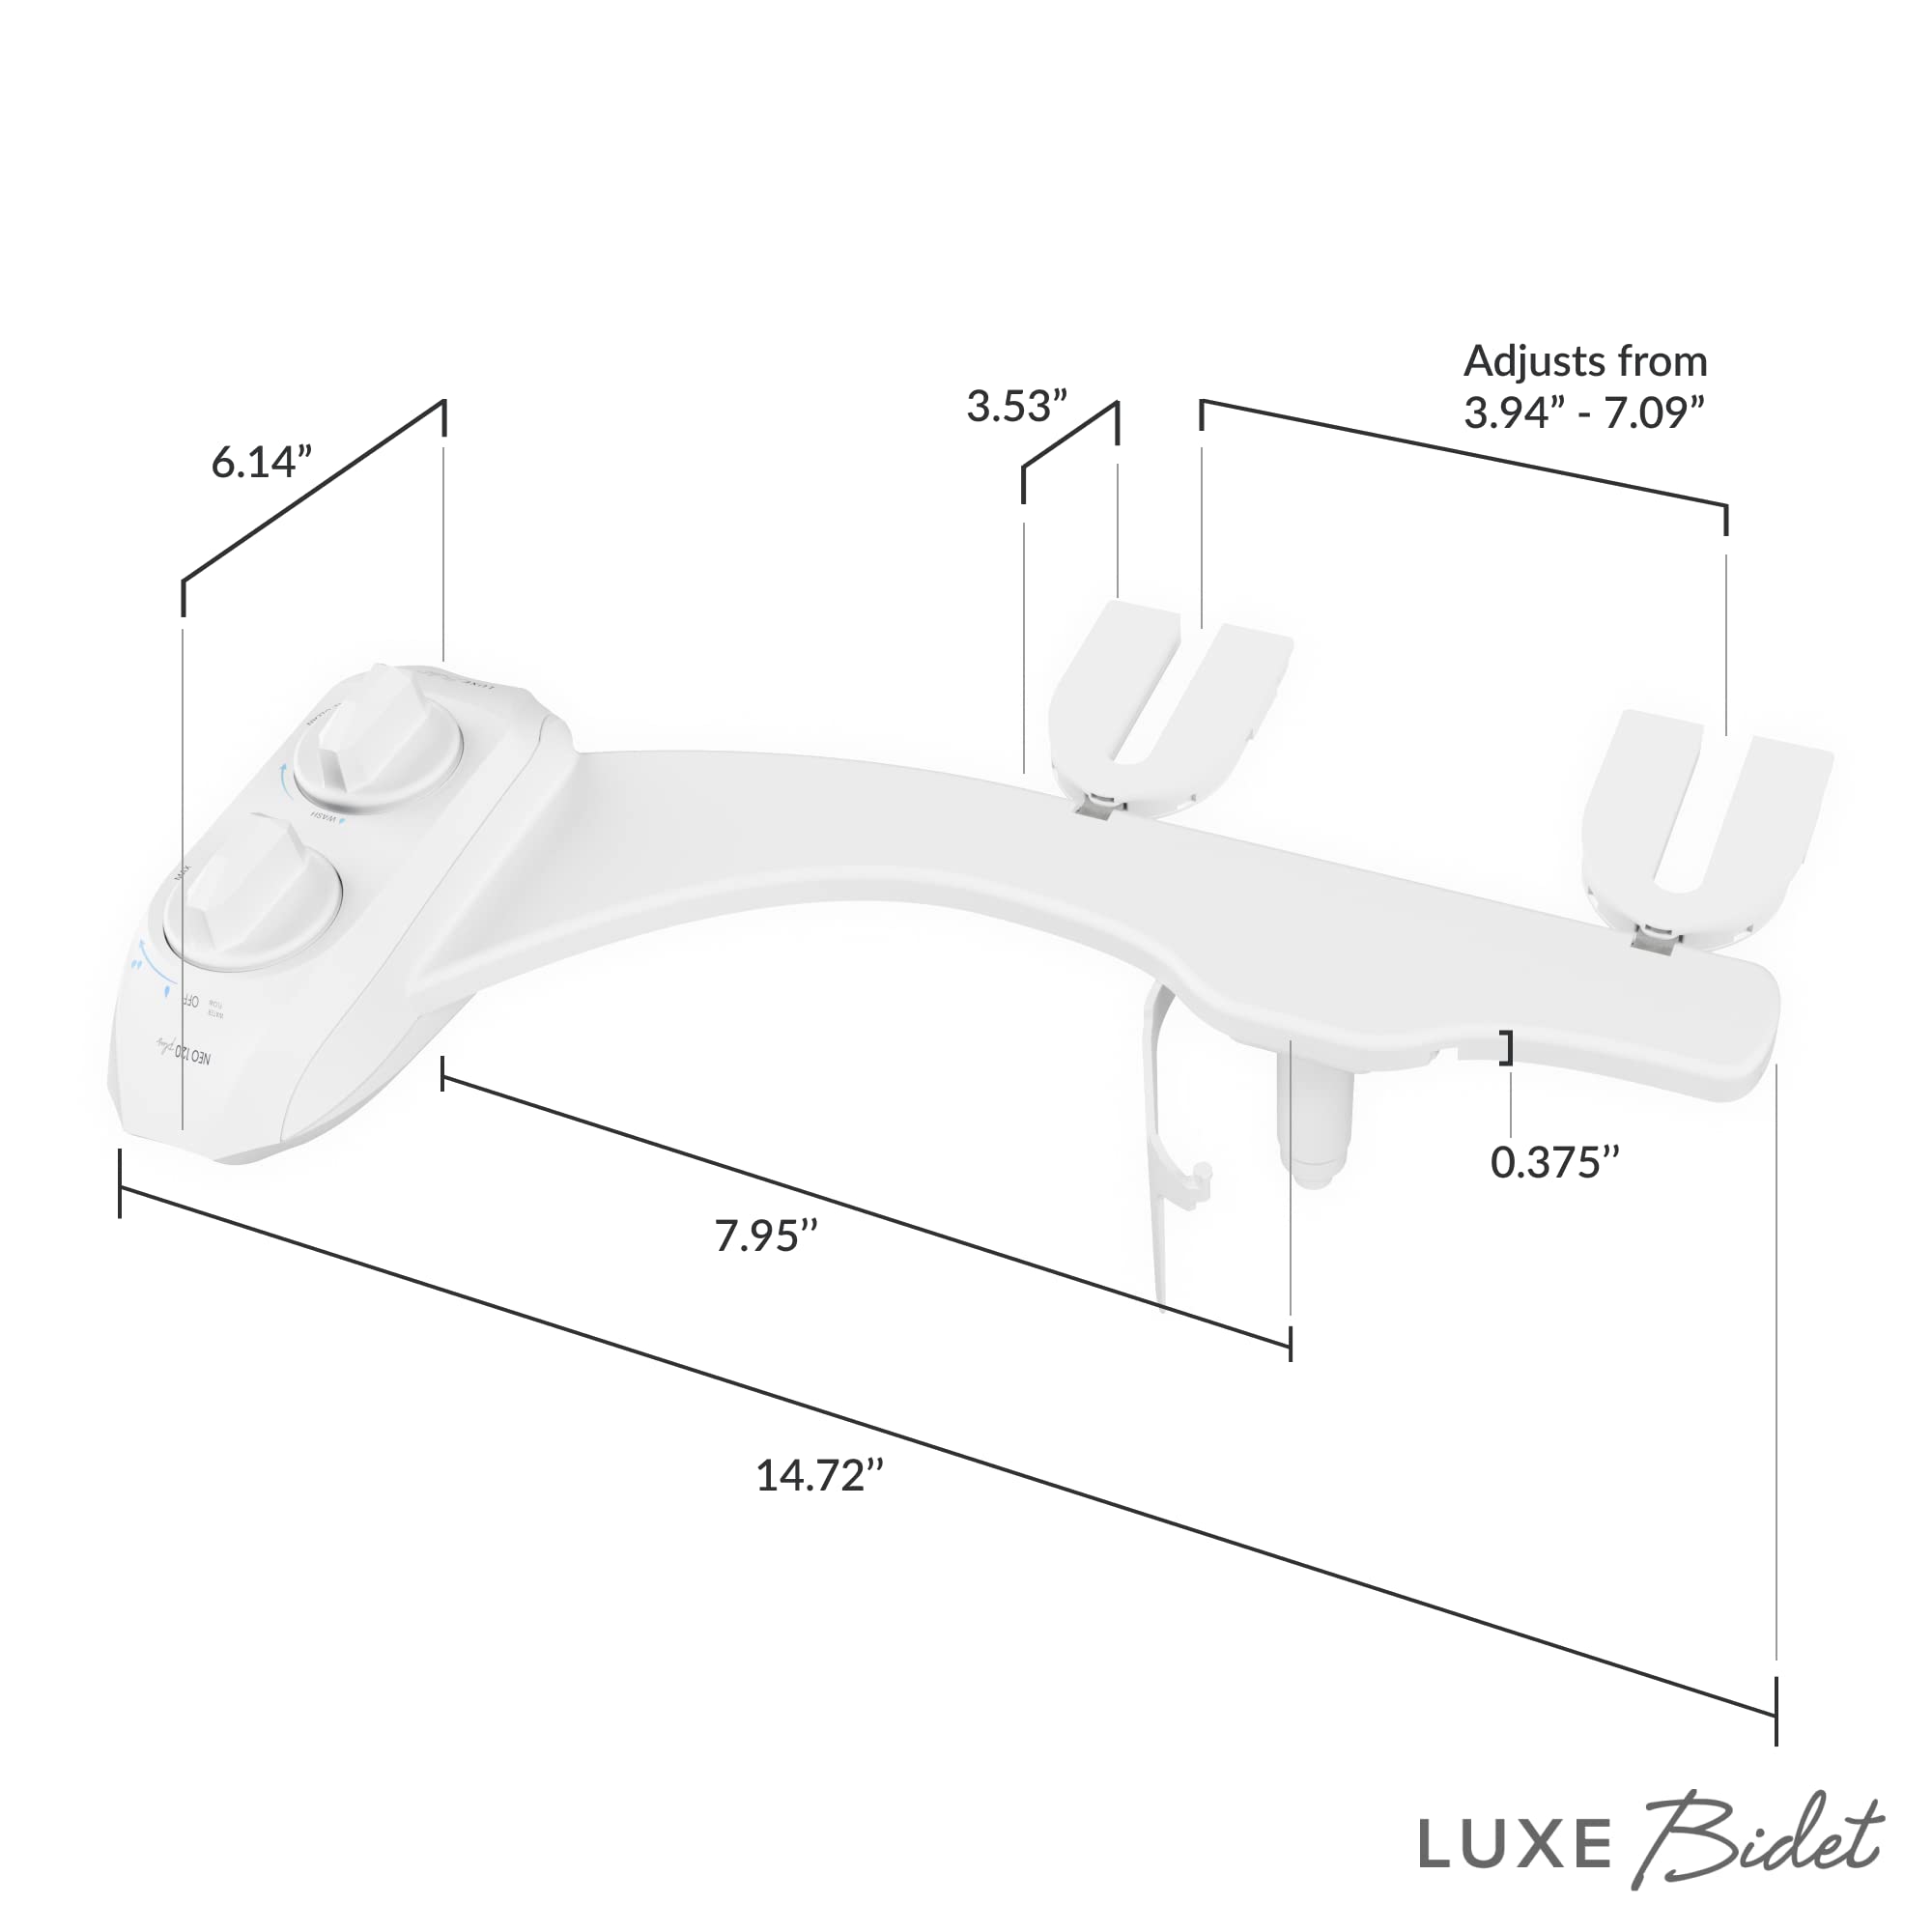 LUXE Bidet NEO 120 Plus – Next-Generation Bidet Toilet Seat Attachment with Innovative EZ-Lift Hinges and 360° Self-Cleaning Mode (White)